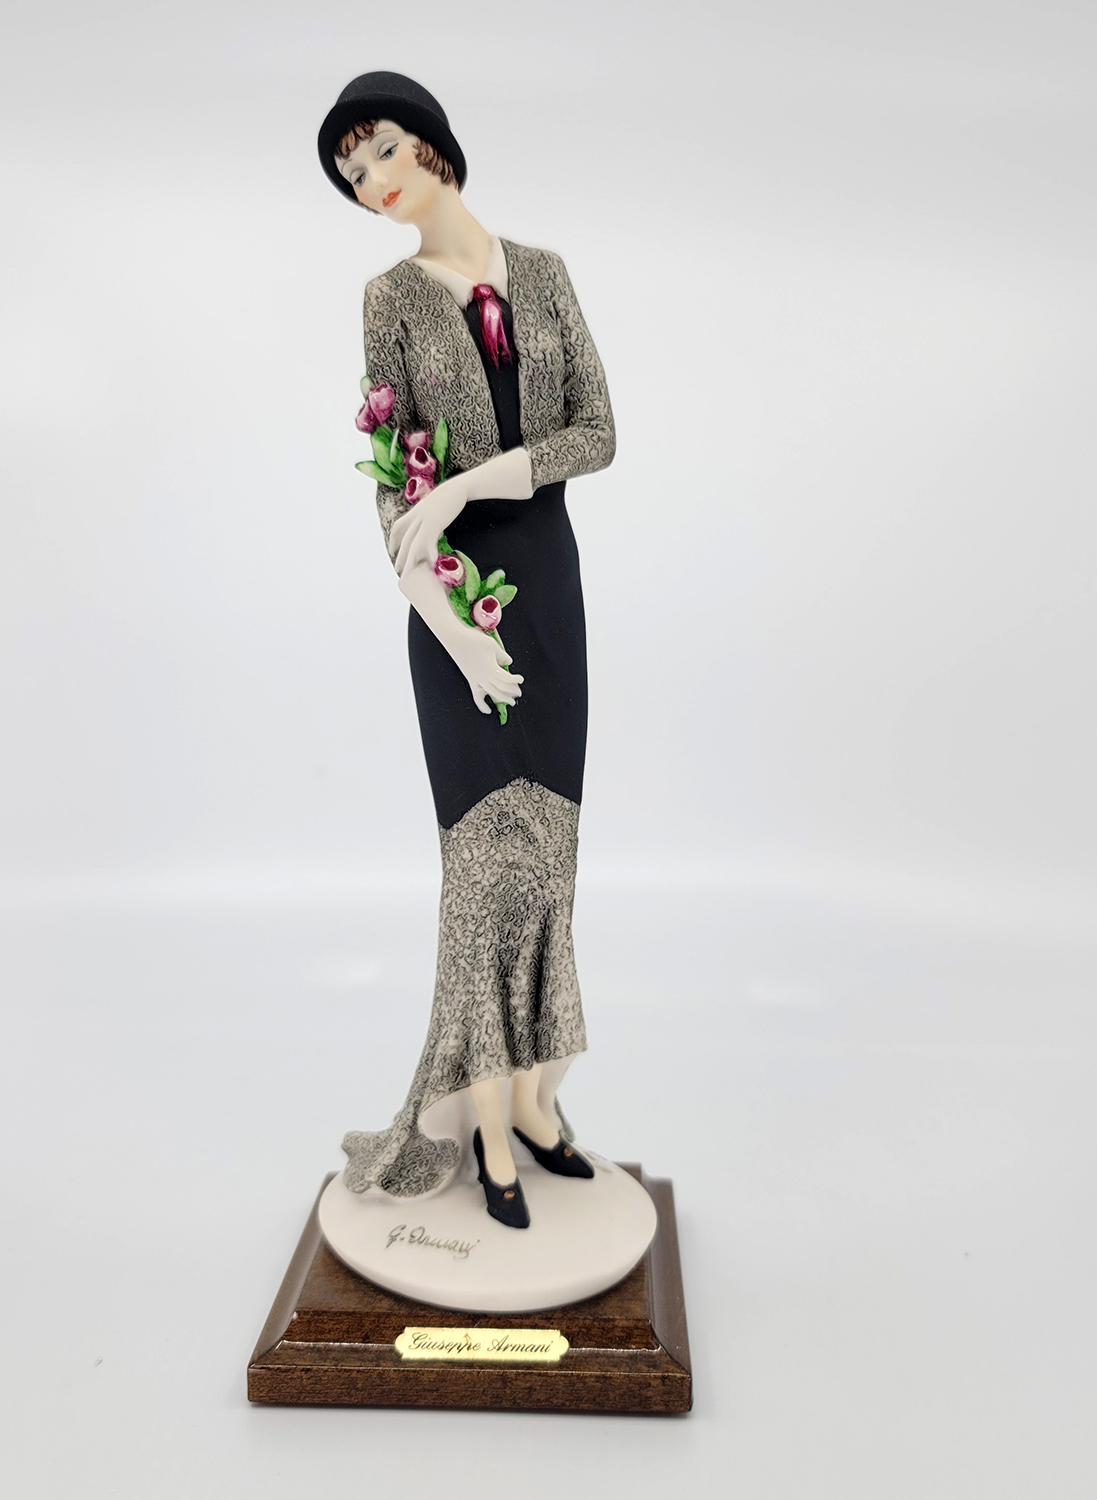 Giuseppe Armani Lady With Flowers 0413C Open Edition Sculpture.